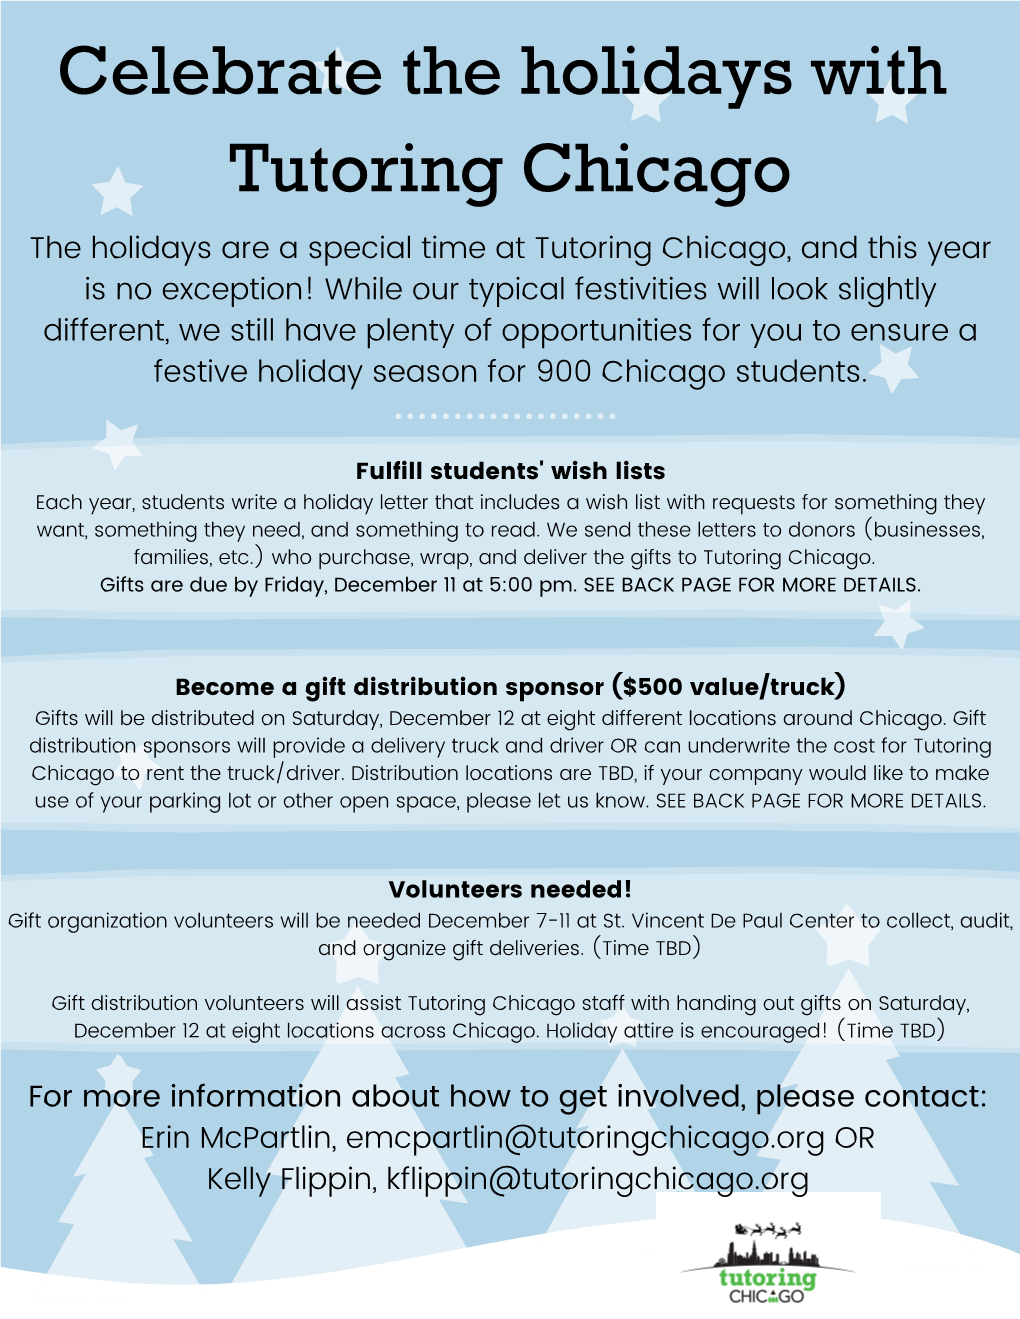 Celebrate the Holidays with Tutoring Chicago